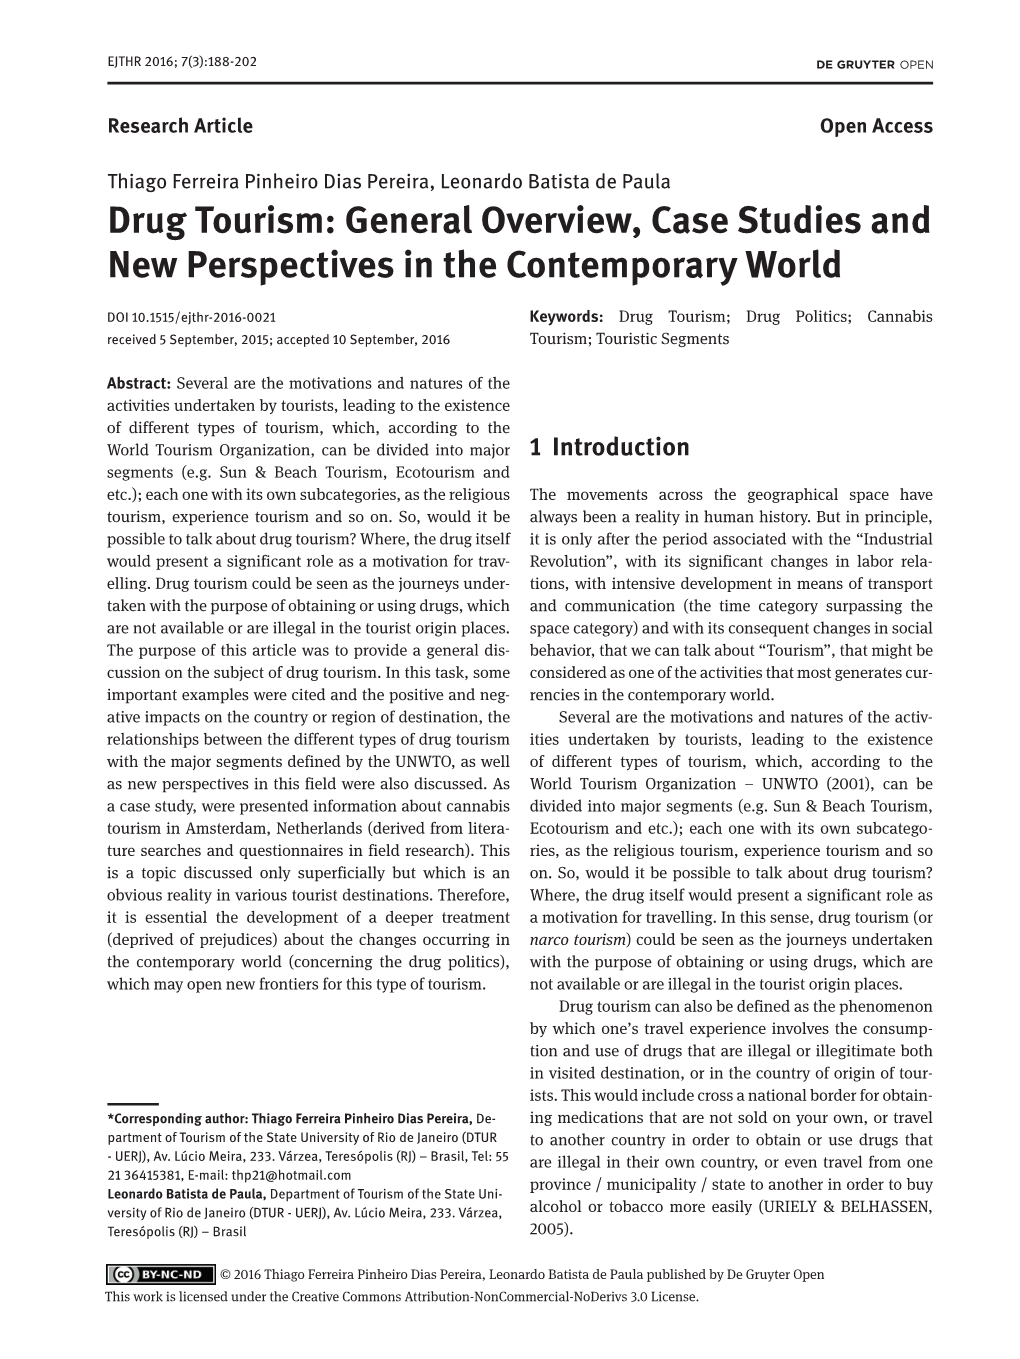 Drug Tourism: General Overview, Case Studies and New Perspectives in the Contemporary World